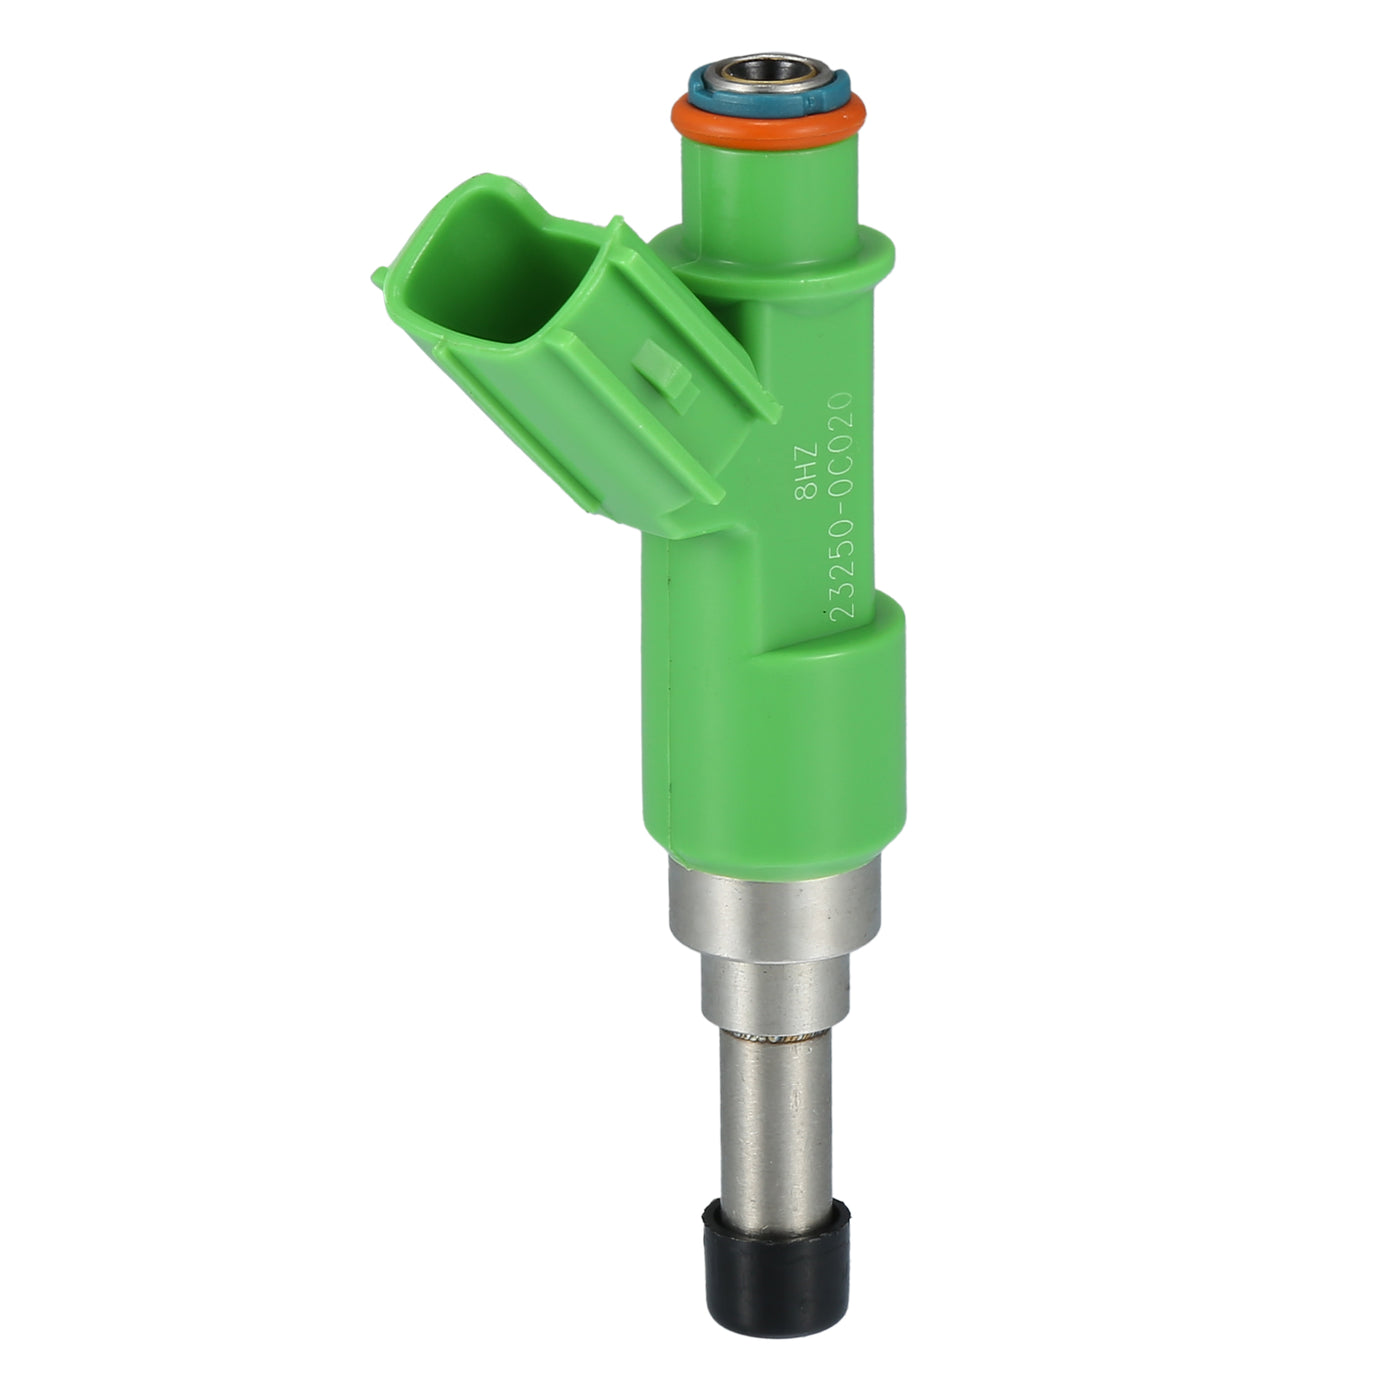 uxcell Uxcell 1pcs Car Fuel Injector Replacement for Toyota Hilux Vigo 2TRFE Metal Plastic Green